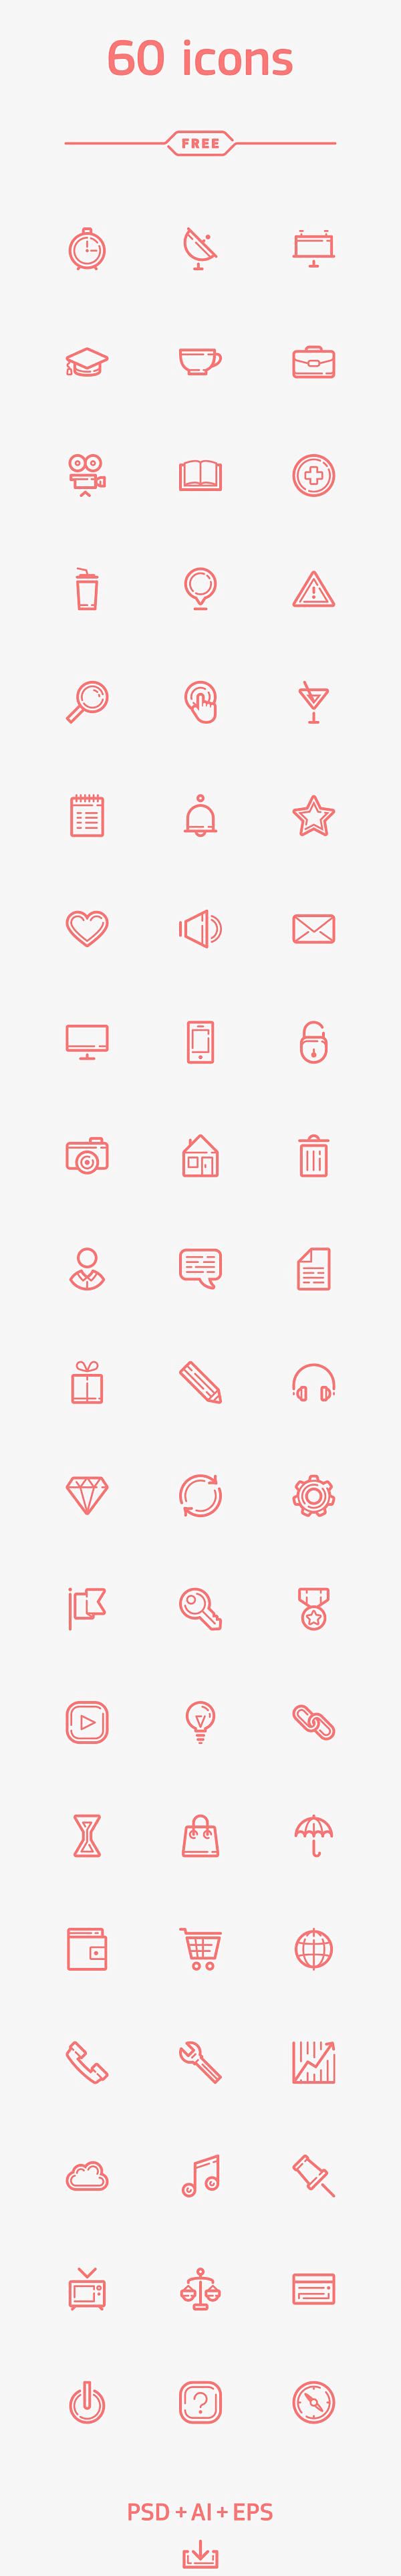 Free Icons for Web a...